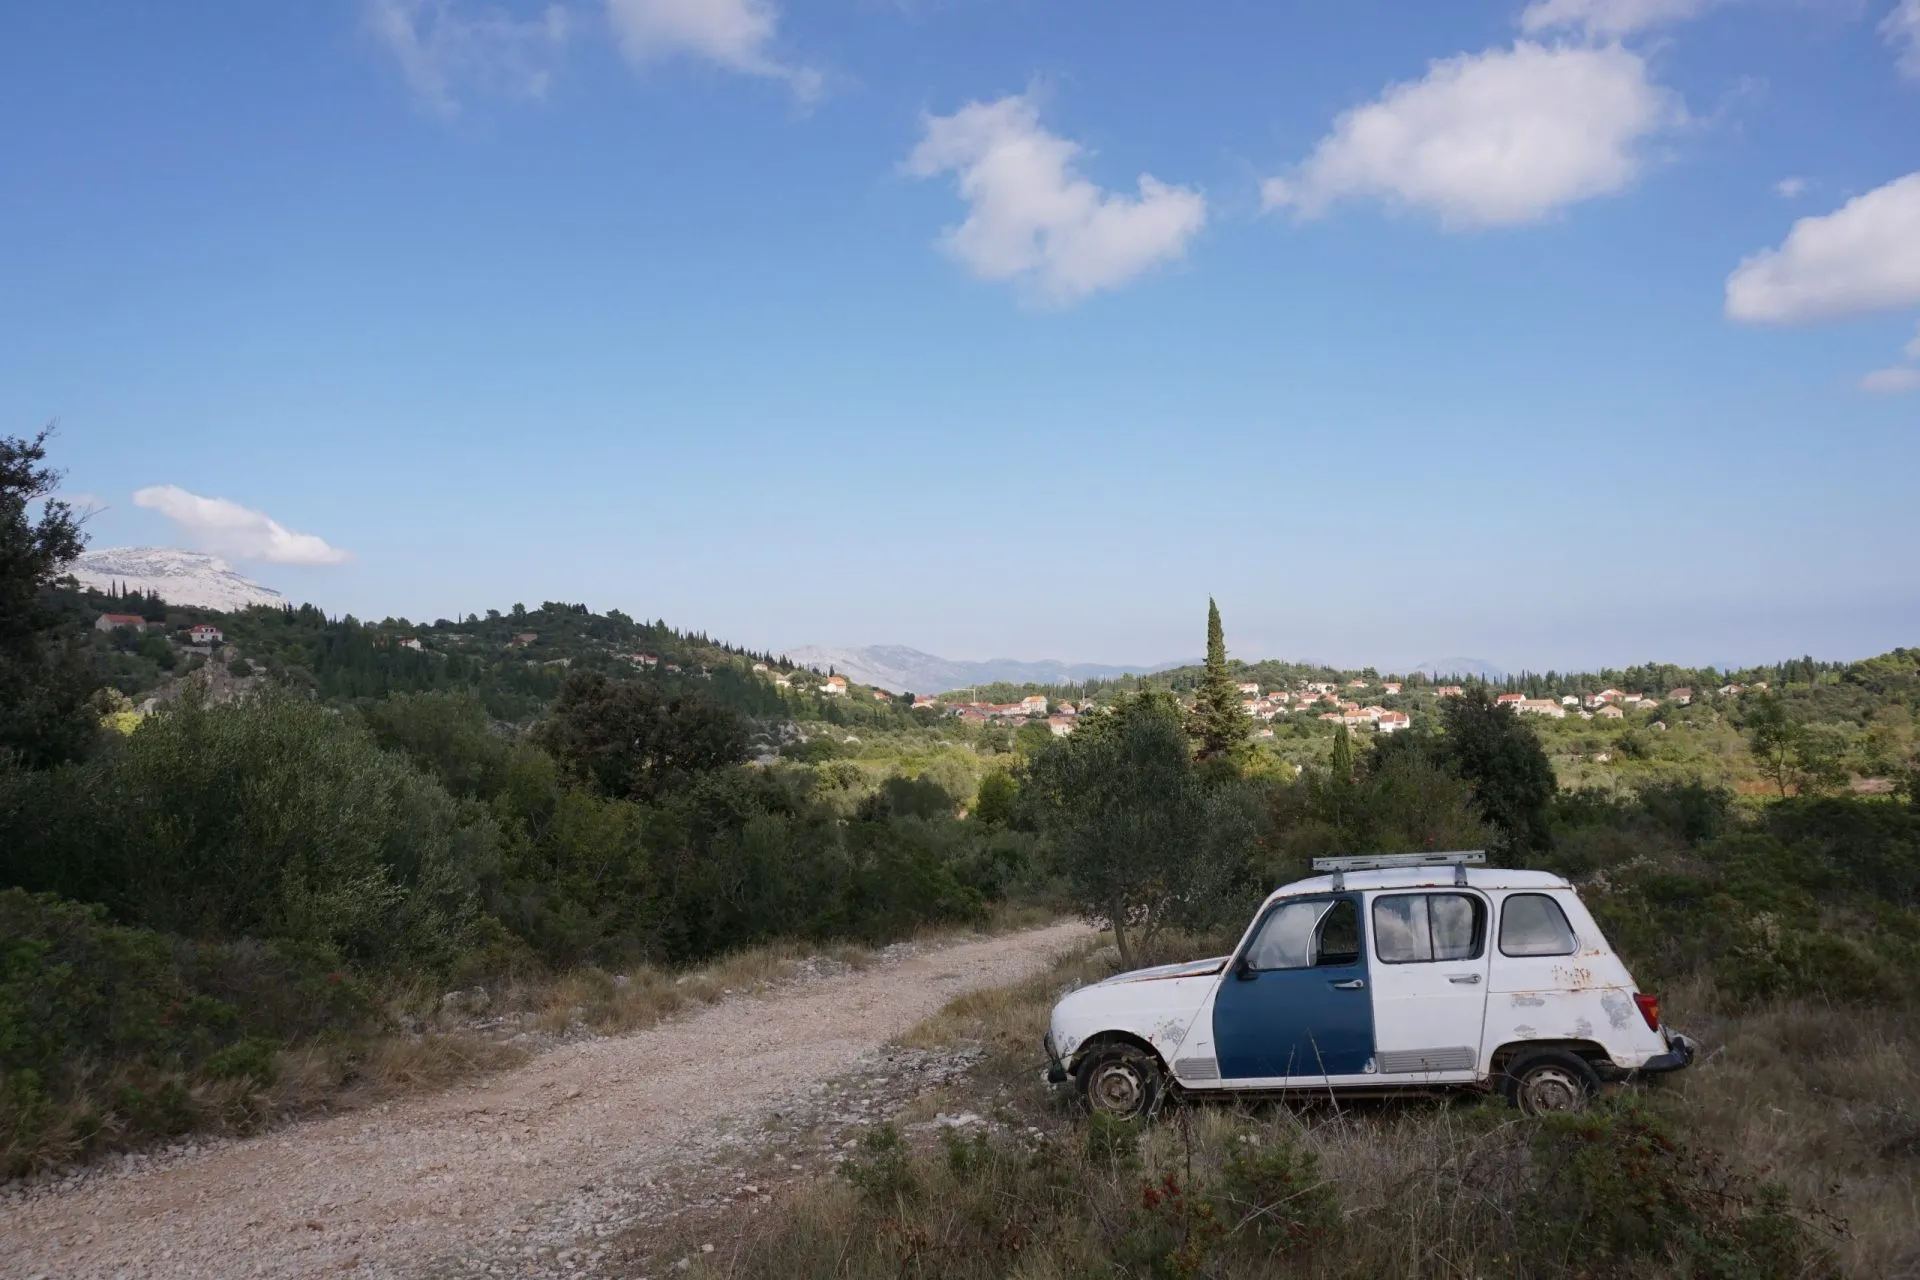 Abandoned old car in the middle of nowhere on the island of korcula